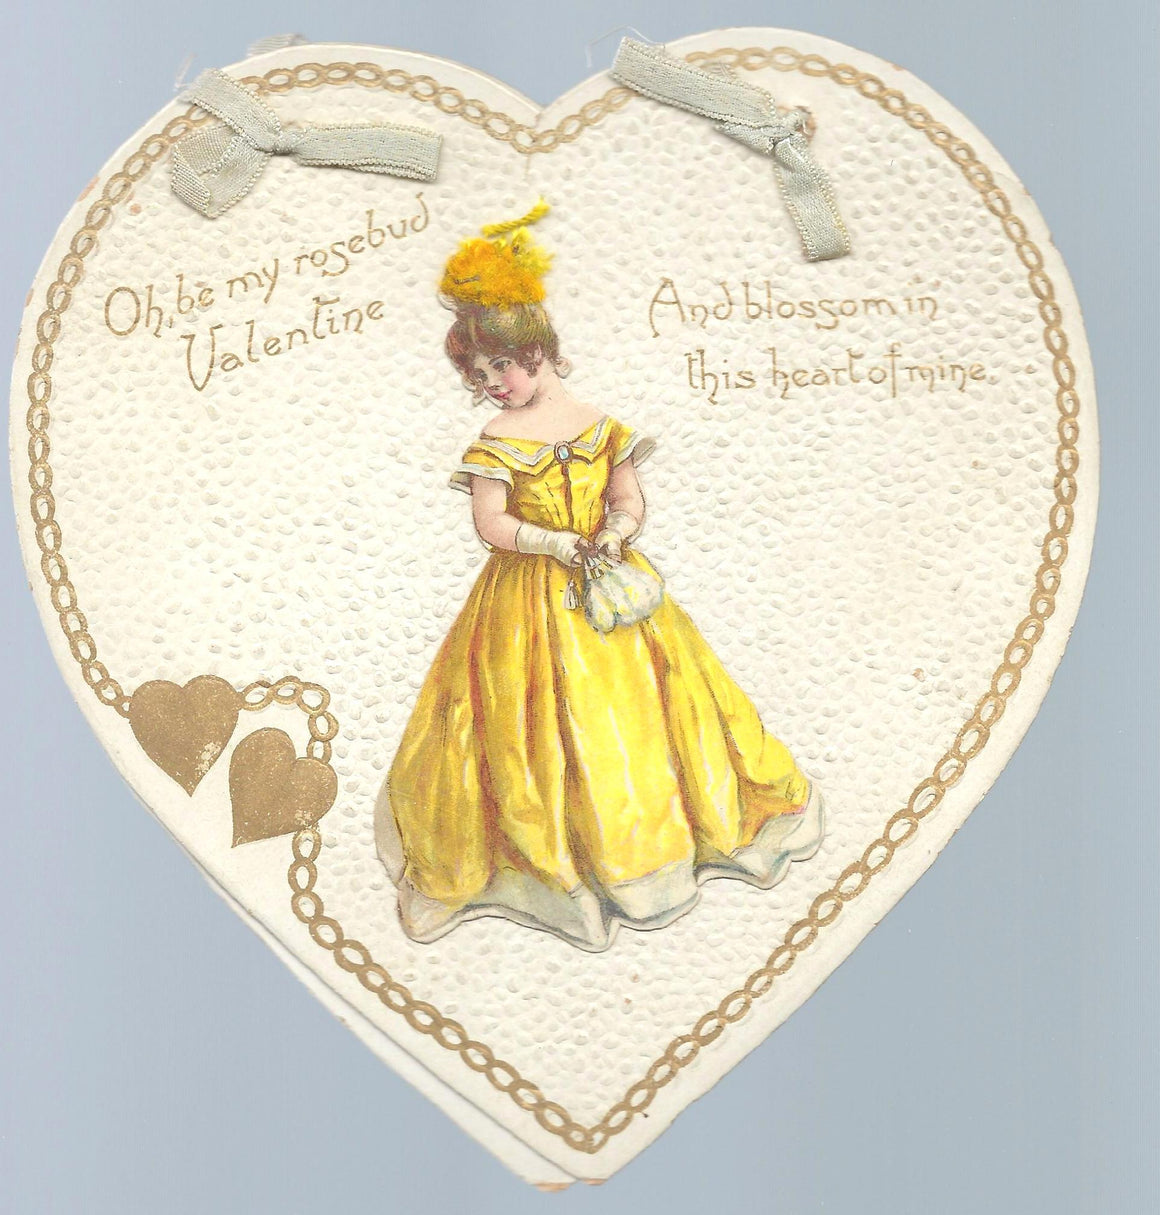 Die Cut Valentine Raphael Tuck Gold Embossed Heart Shaped Card Young Girl in Yellow Gown